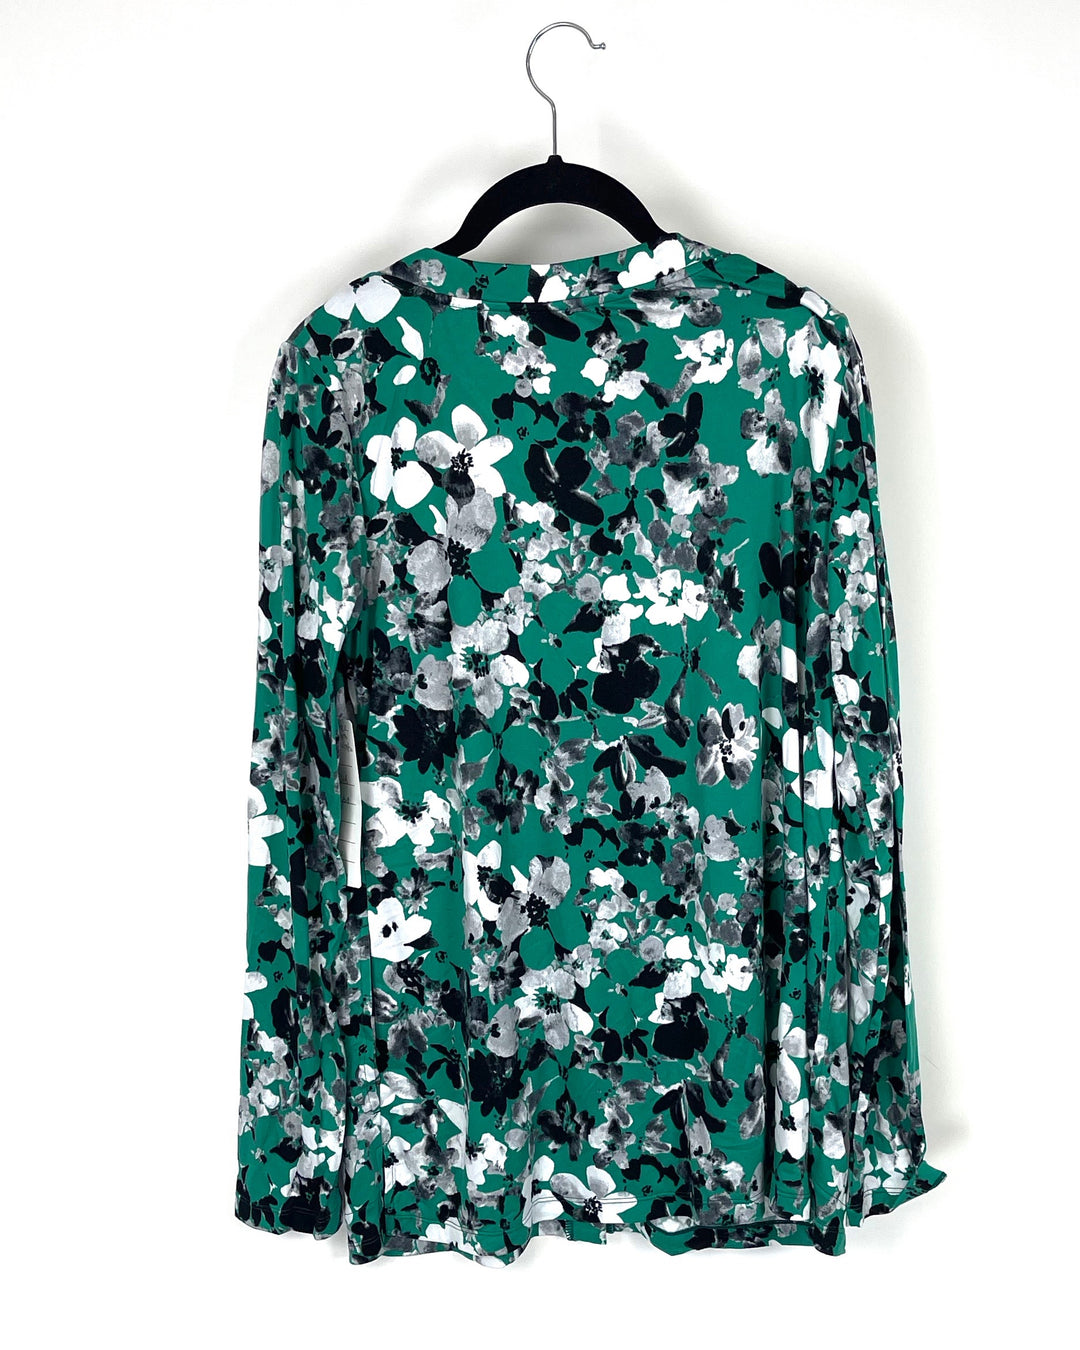 Green Floral Top - Small